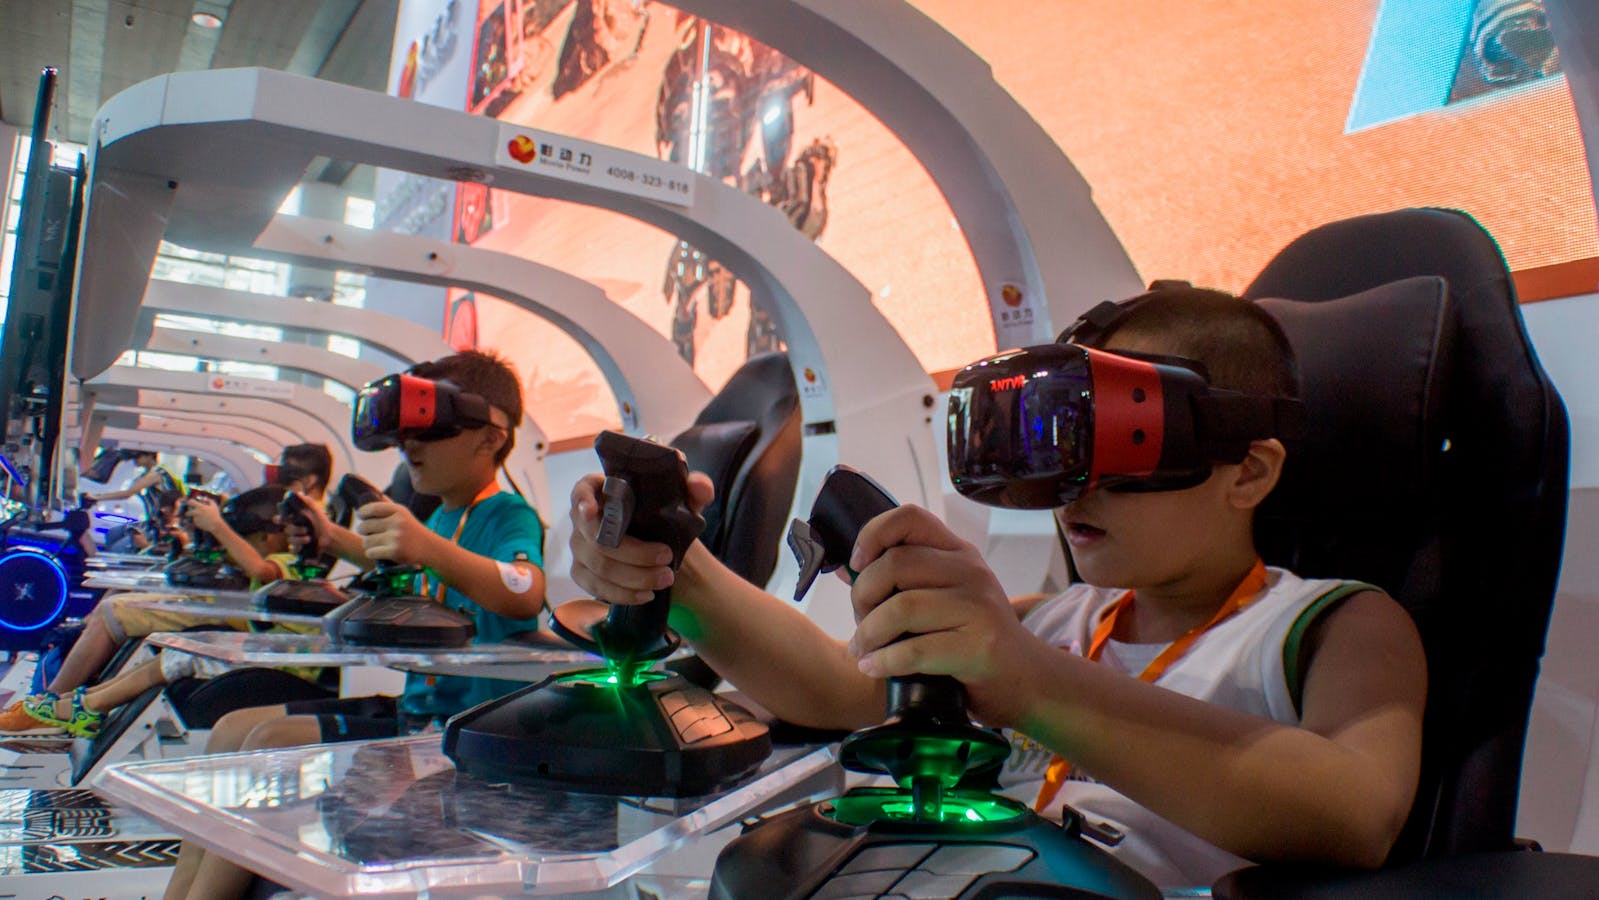 Children played virtual reality games during an exhibition in Guangzhou, China, in 2017. Photo: AP